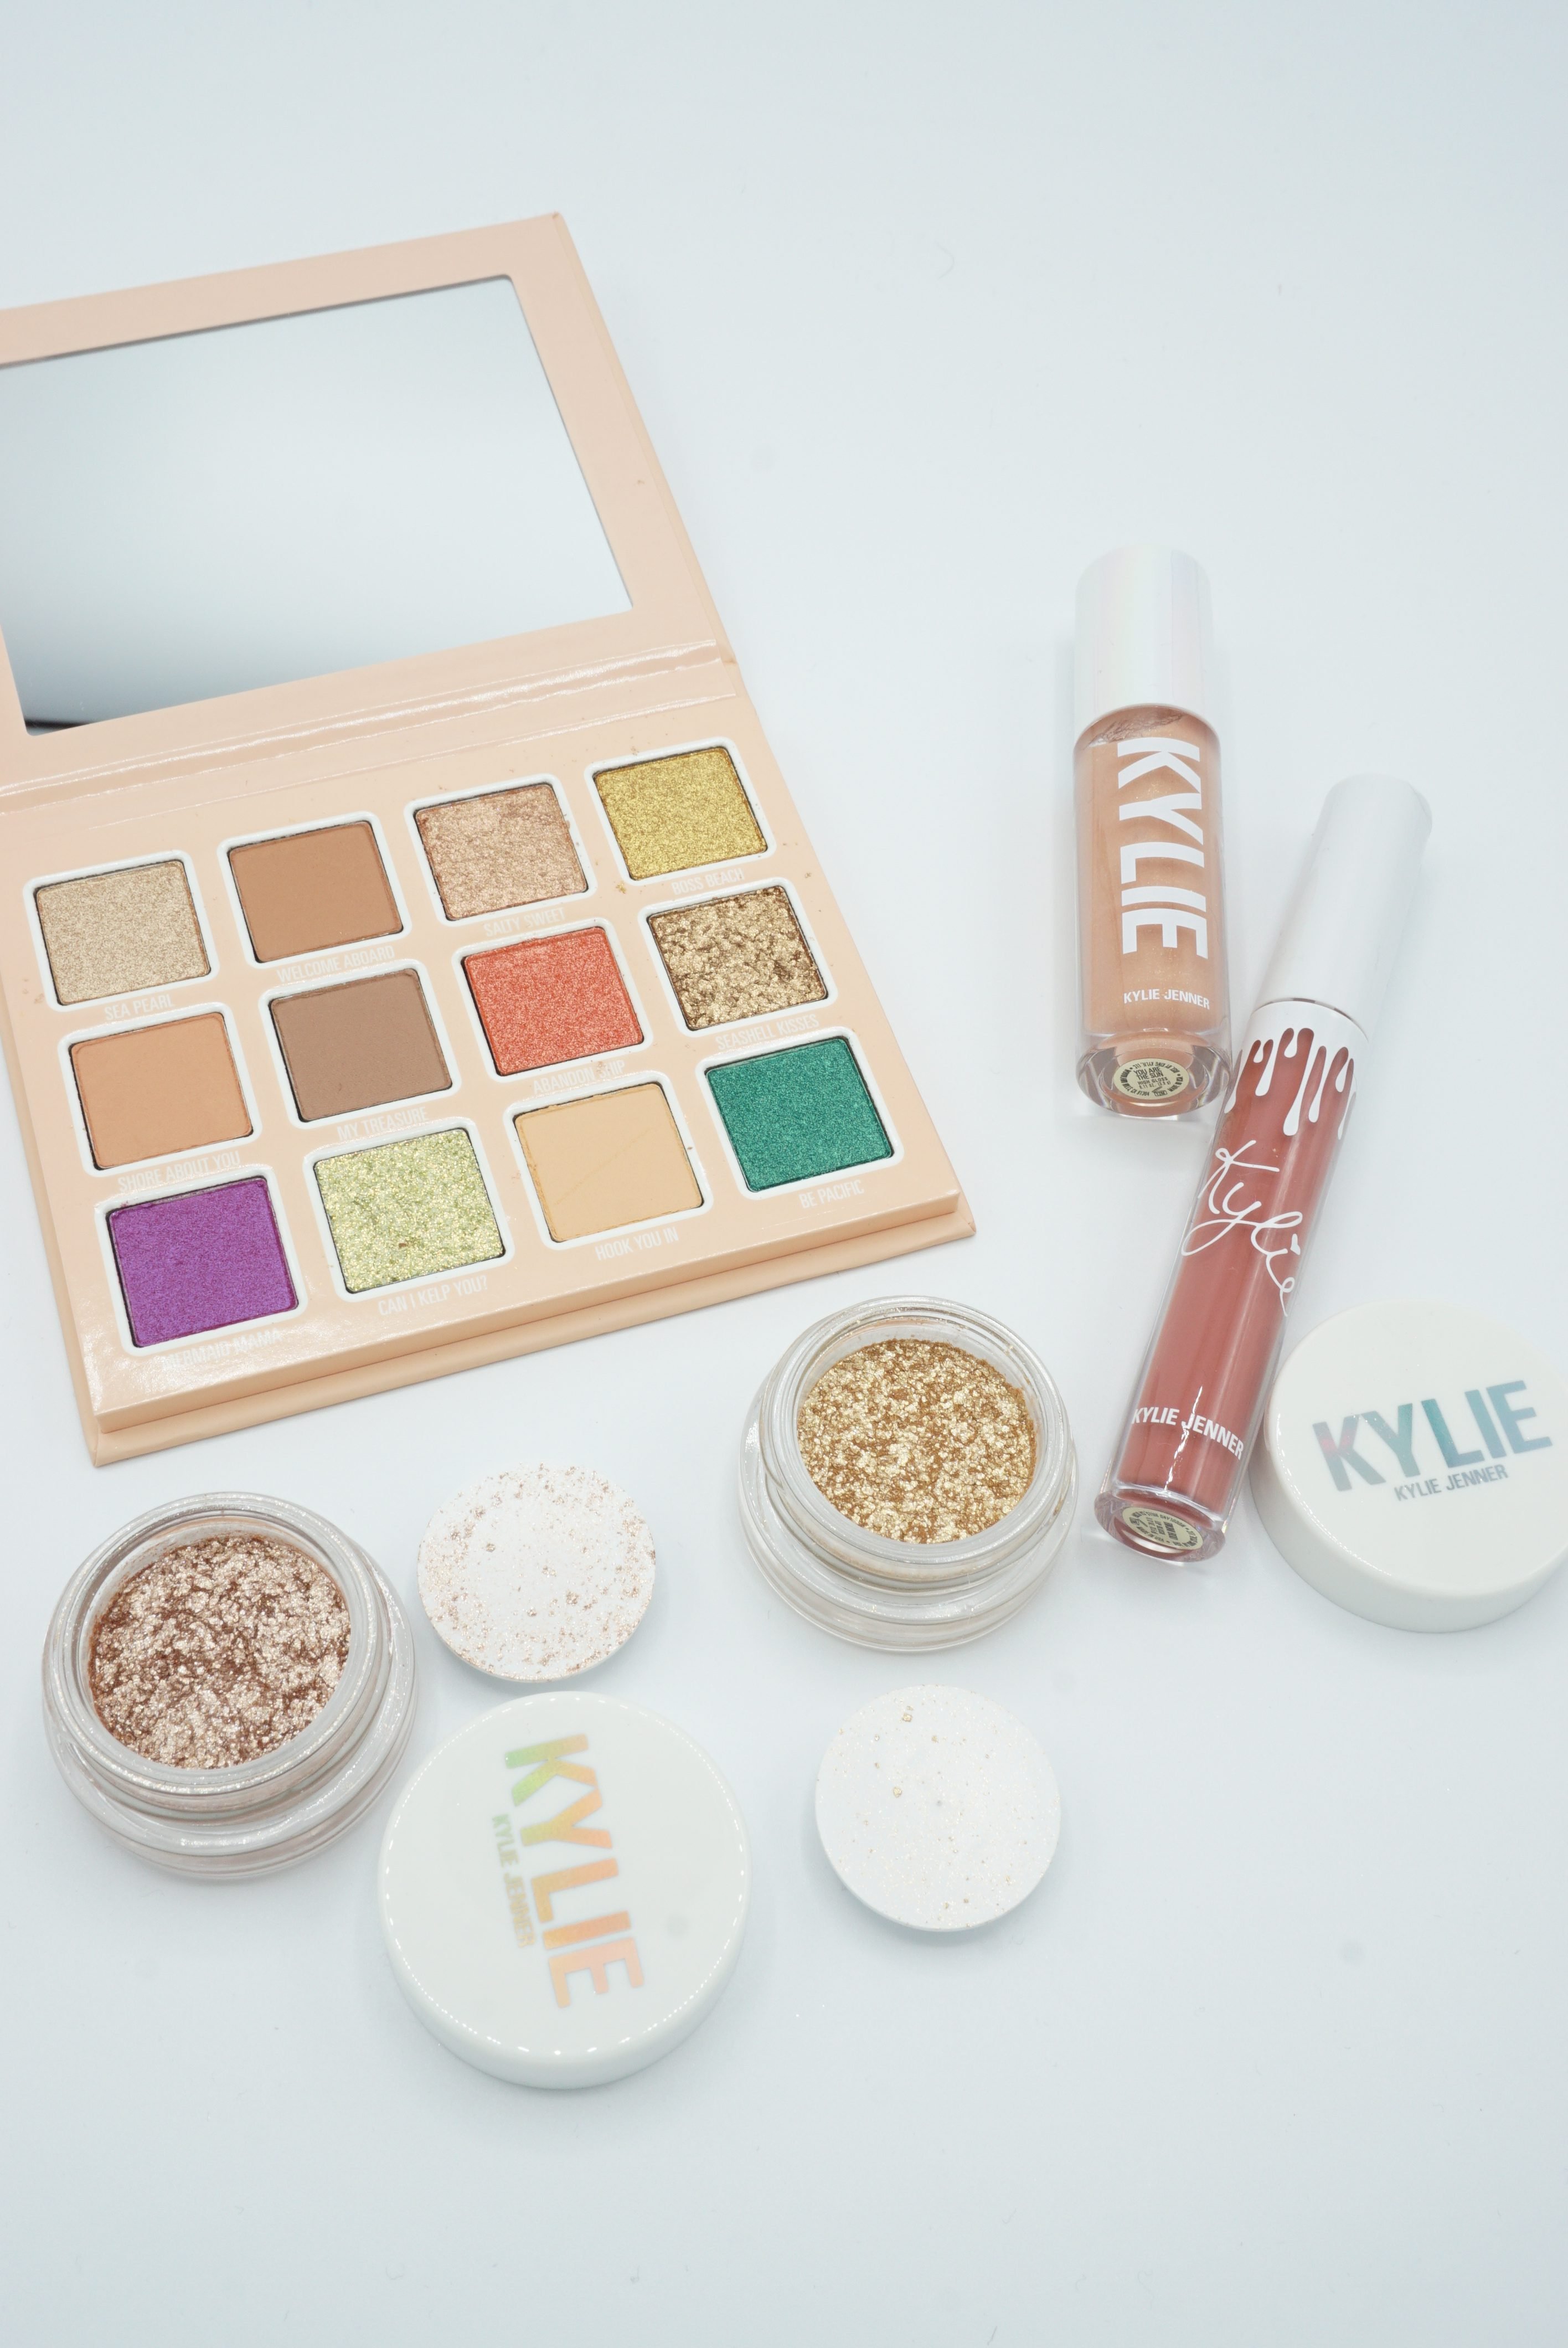 Kylie Cosmetics Summer 2019 Collection | Review